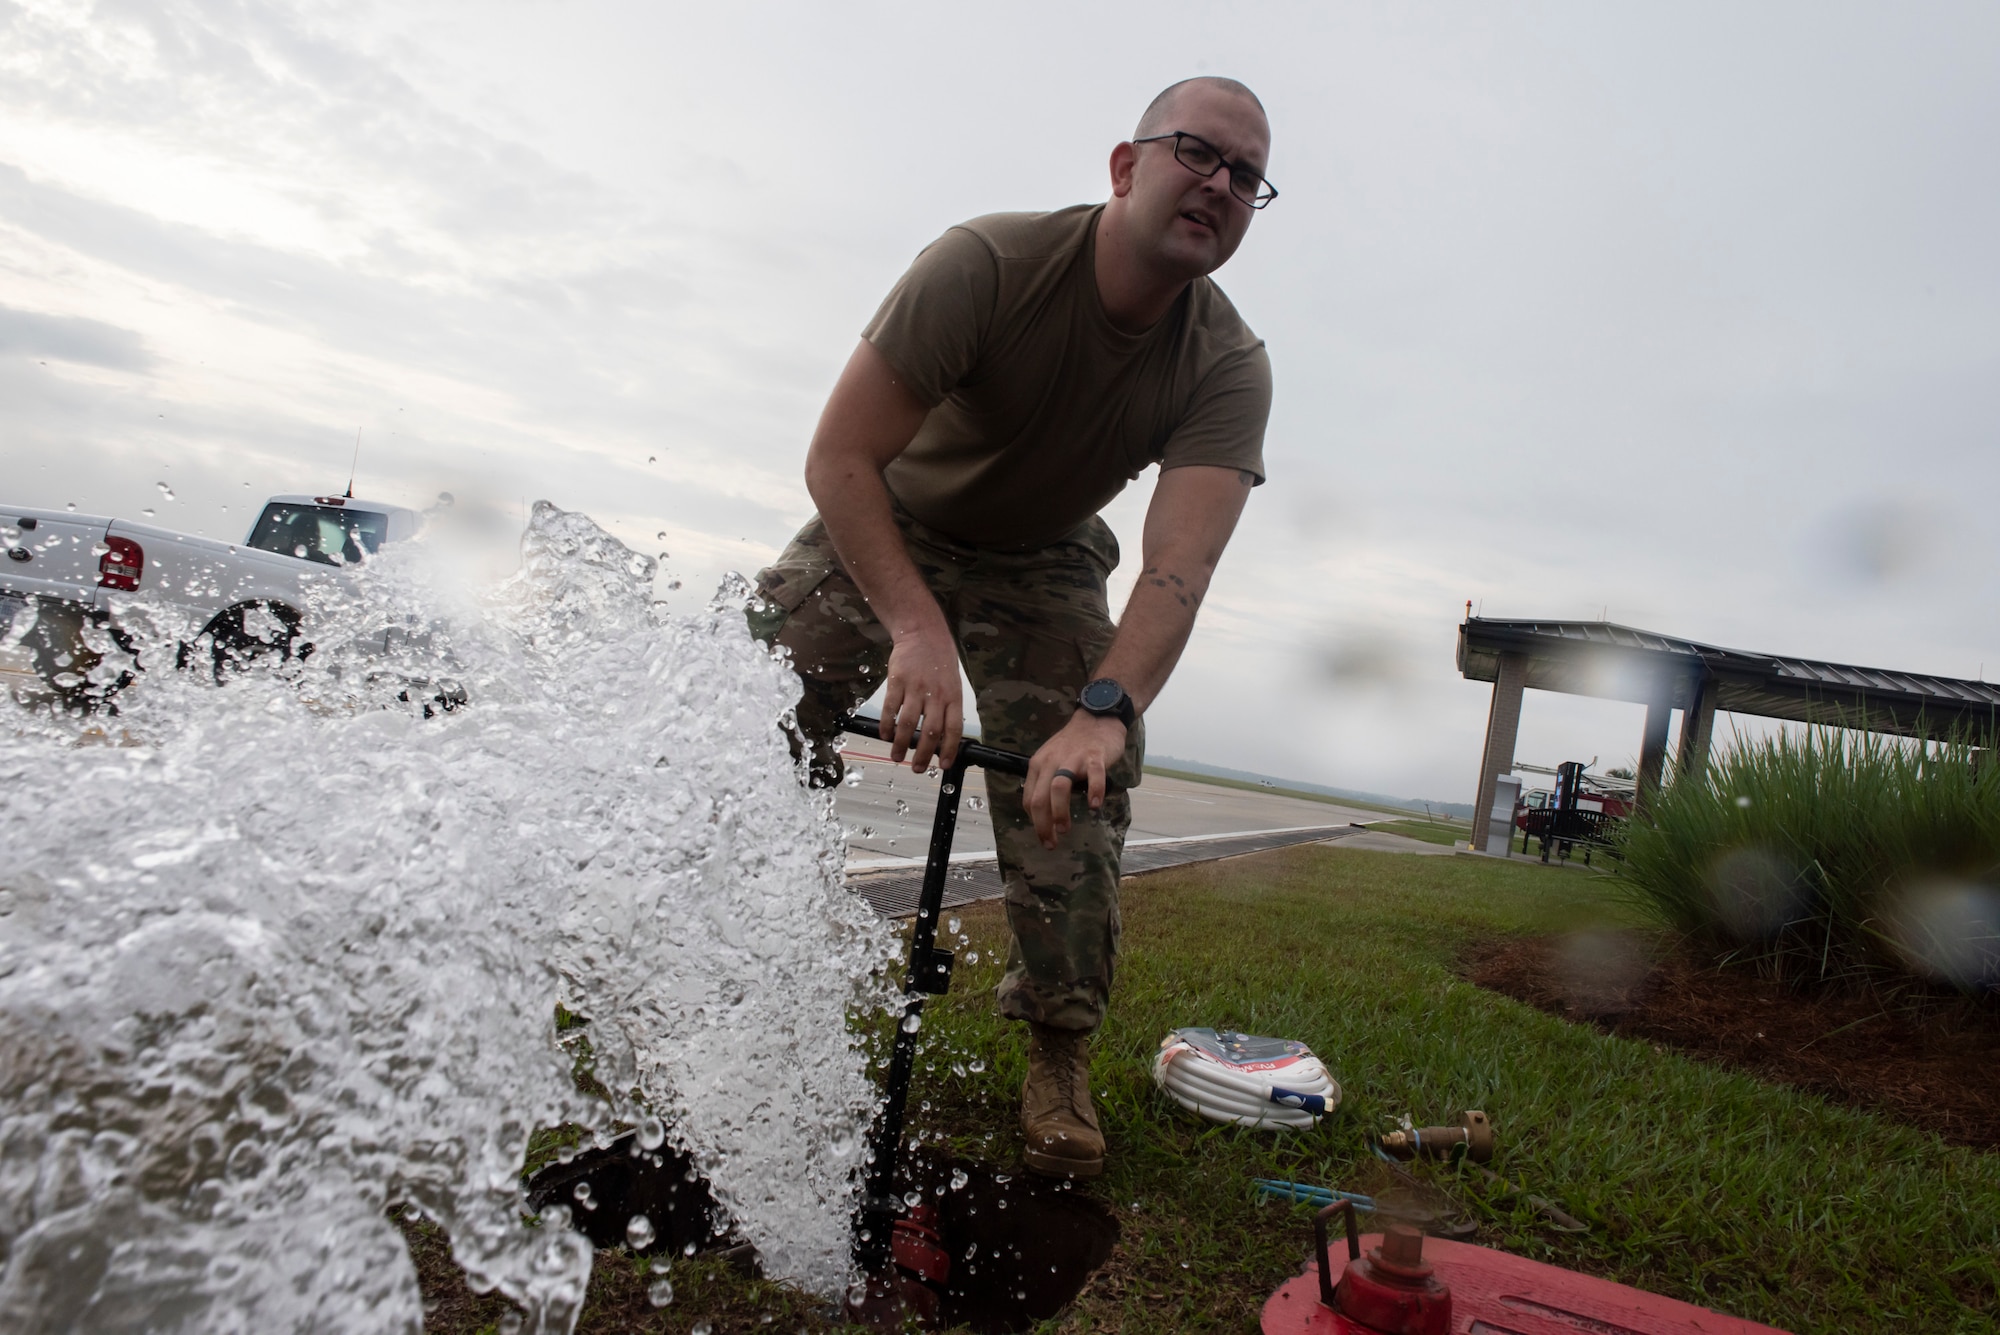 Staff Sgt. Douglas Shaw, 23d Civil Engineer Squadron (CES) water and fuel systems maintenance journeyman, clears dirty water from a water pump Oct. 29, 2019, at Moody Air Force Base, Ga. The 23d CES installed water fountains around the flightline in preparation for the air show. This will give air show attendees locations for clean water and help with dehydration related injuries. (U.S. Air Force photo by Airman Elijah Dority)